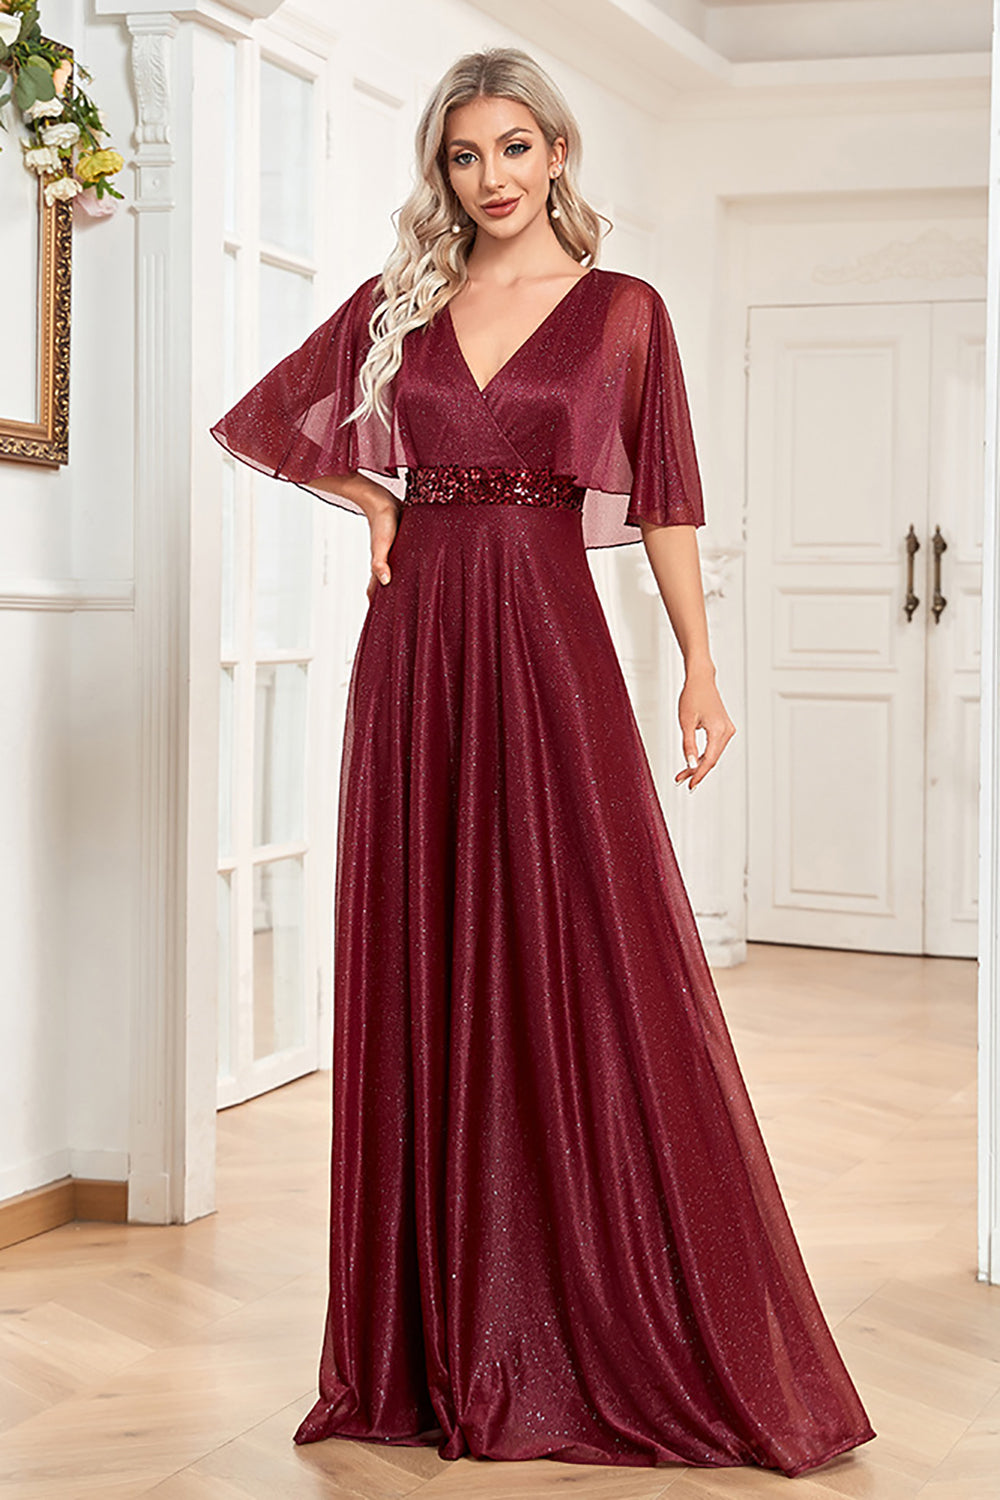 Burgundy A Line V Neck Shiny Chiffon Long Dress For Mom With Batwing Sleeves